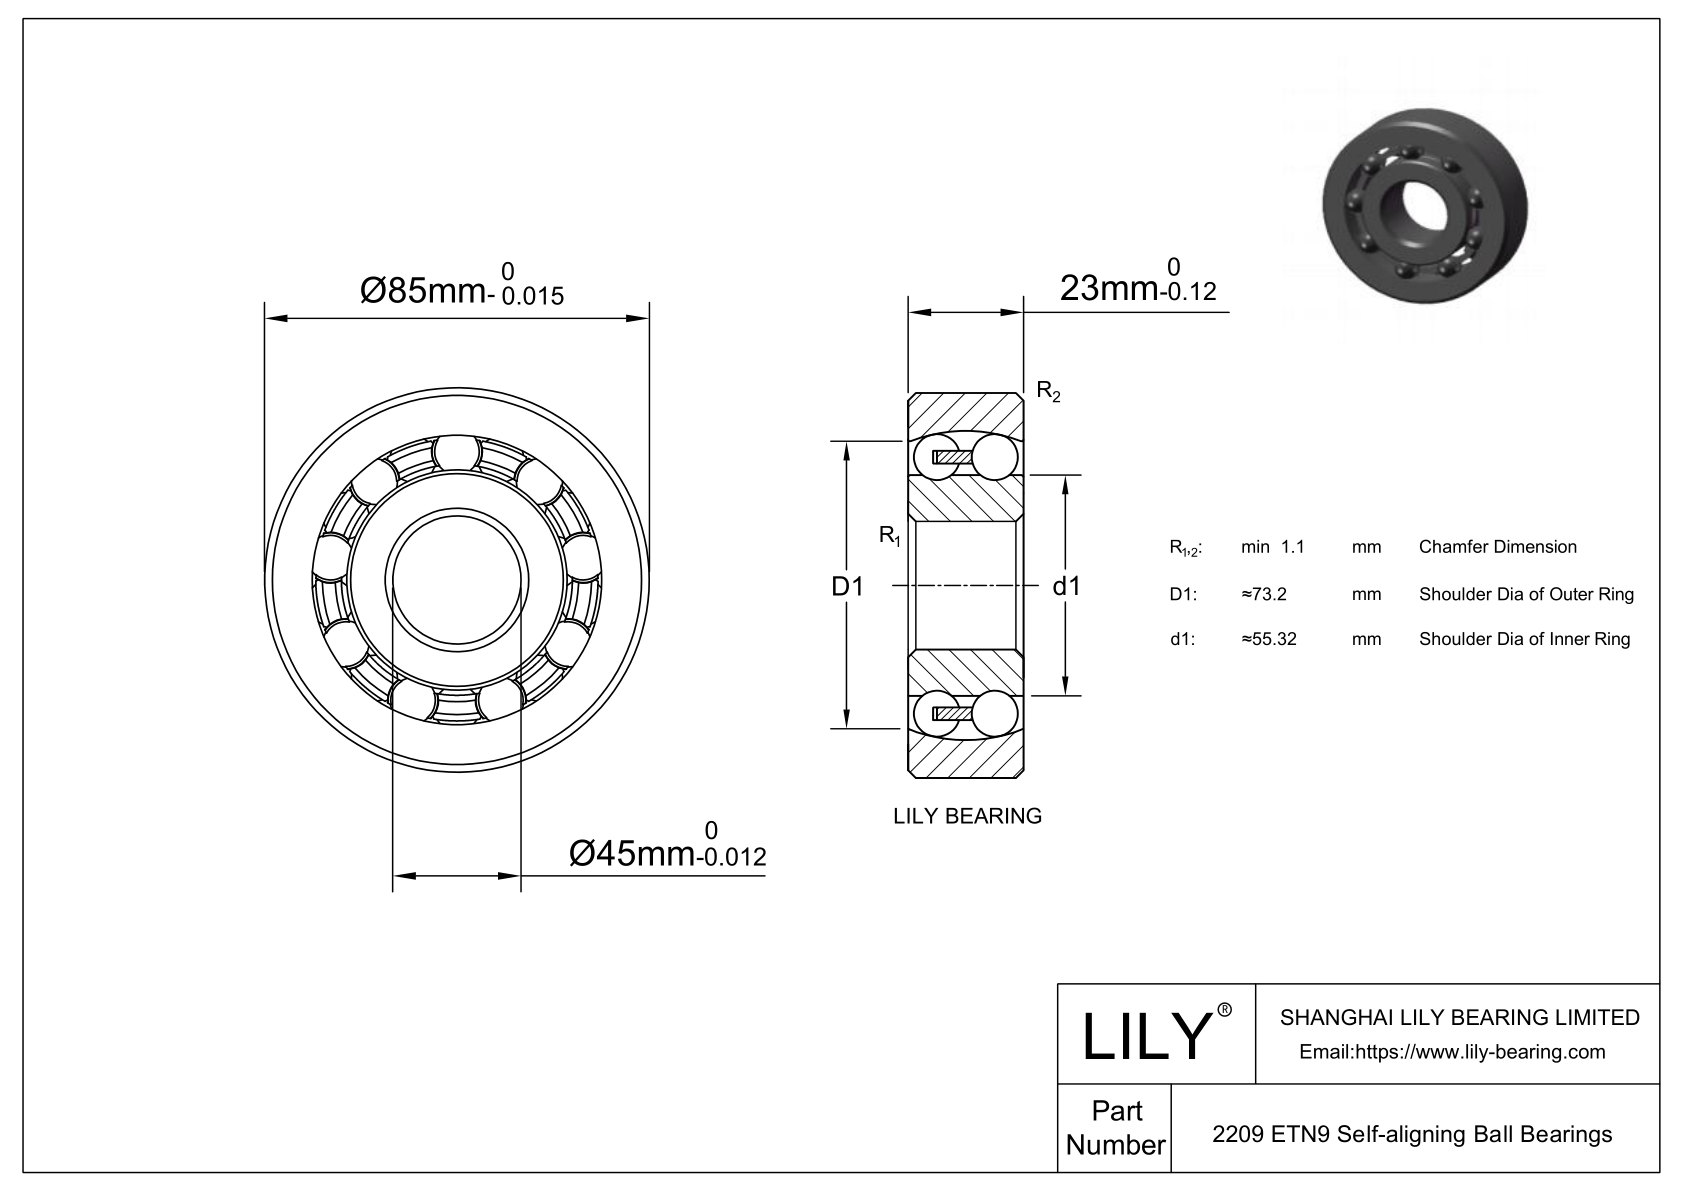 S2209 ETN9 Stainless Steel Self Aligning Ball Bearings cad drawing